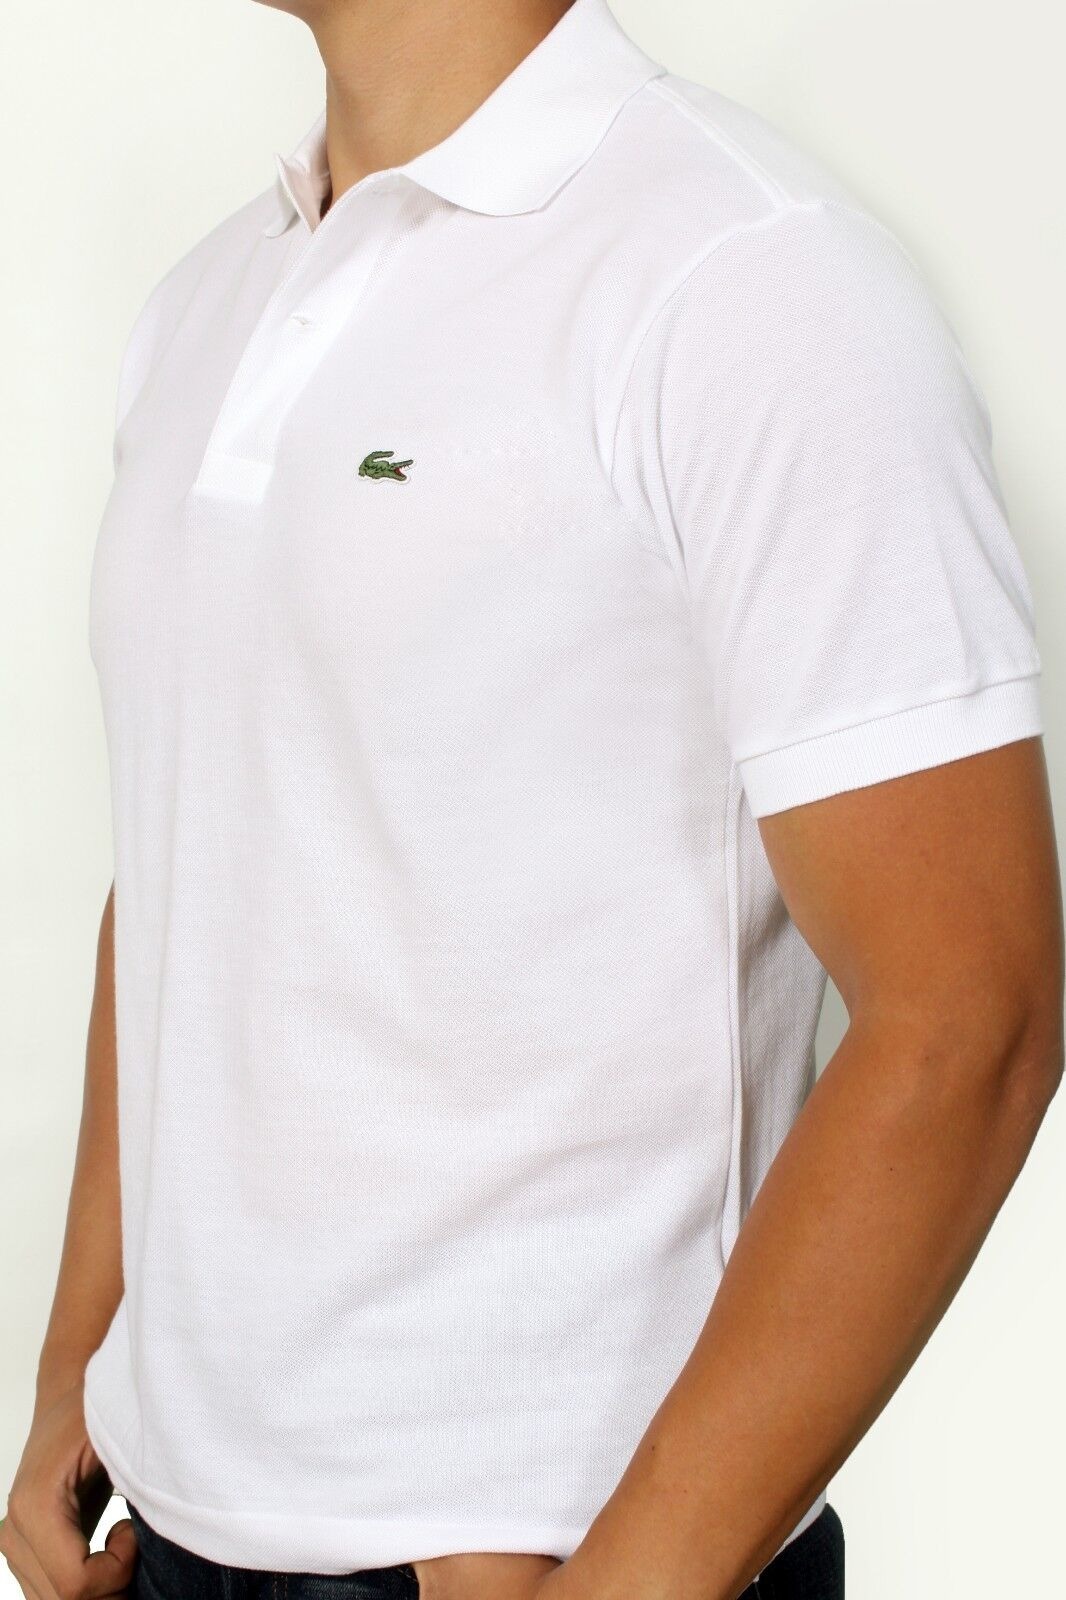 Lacoste WHITE Men's Classic Fit Short Sleeve Polo Shirt, US 2X-Large - image 2 of 4